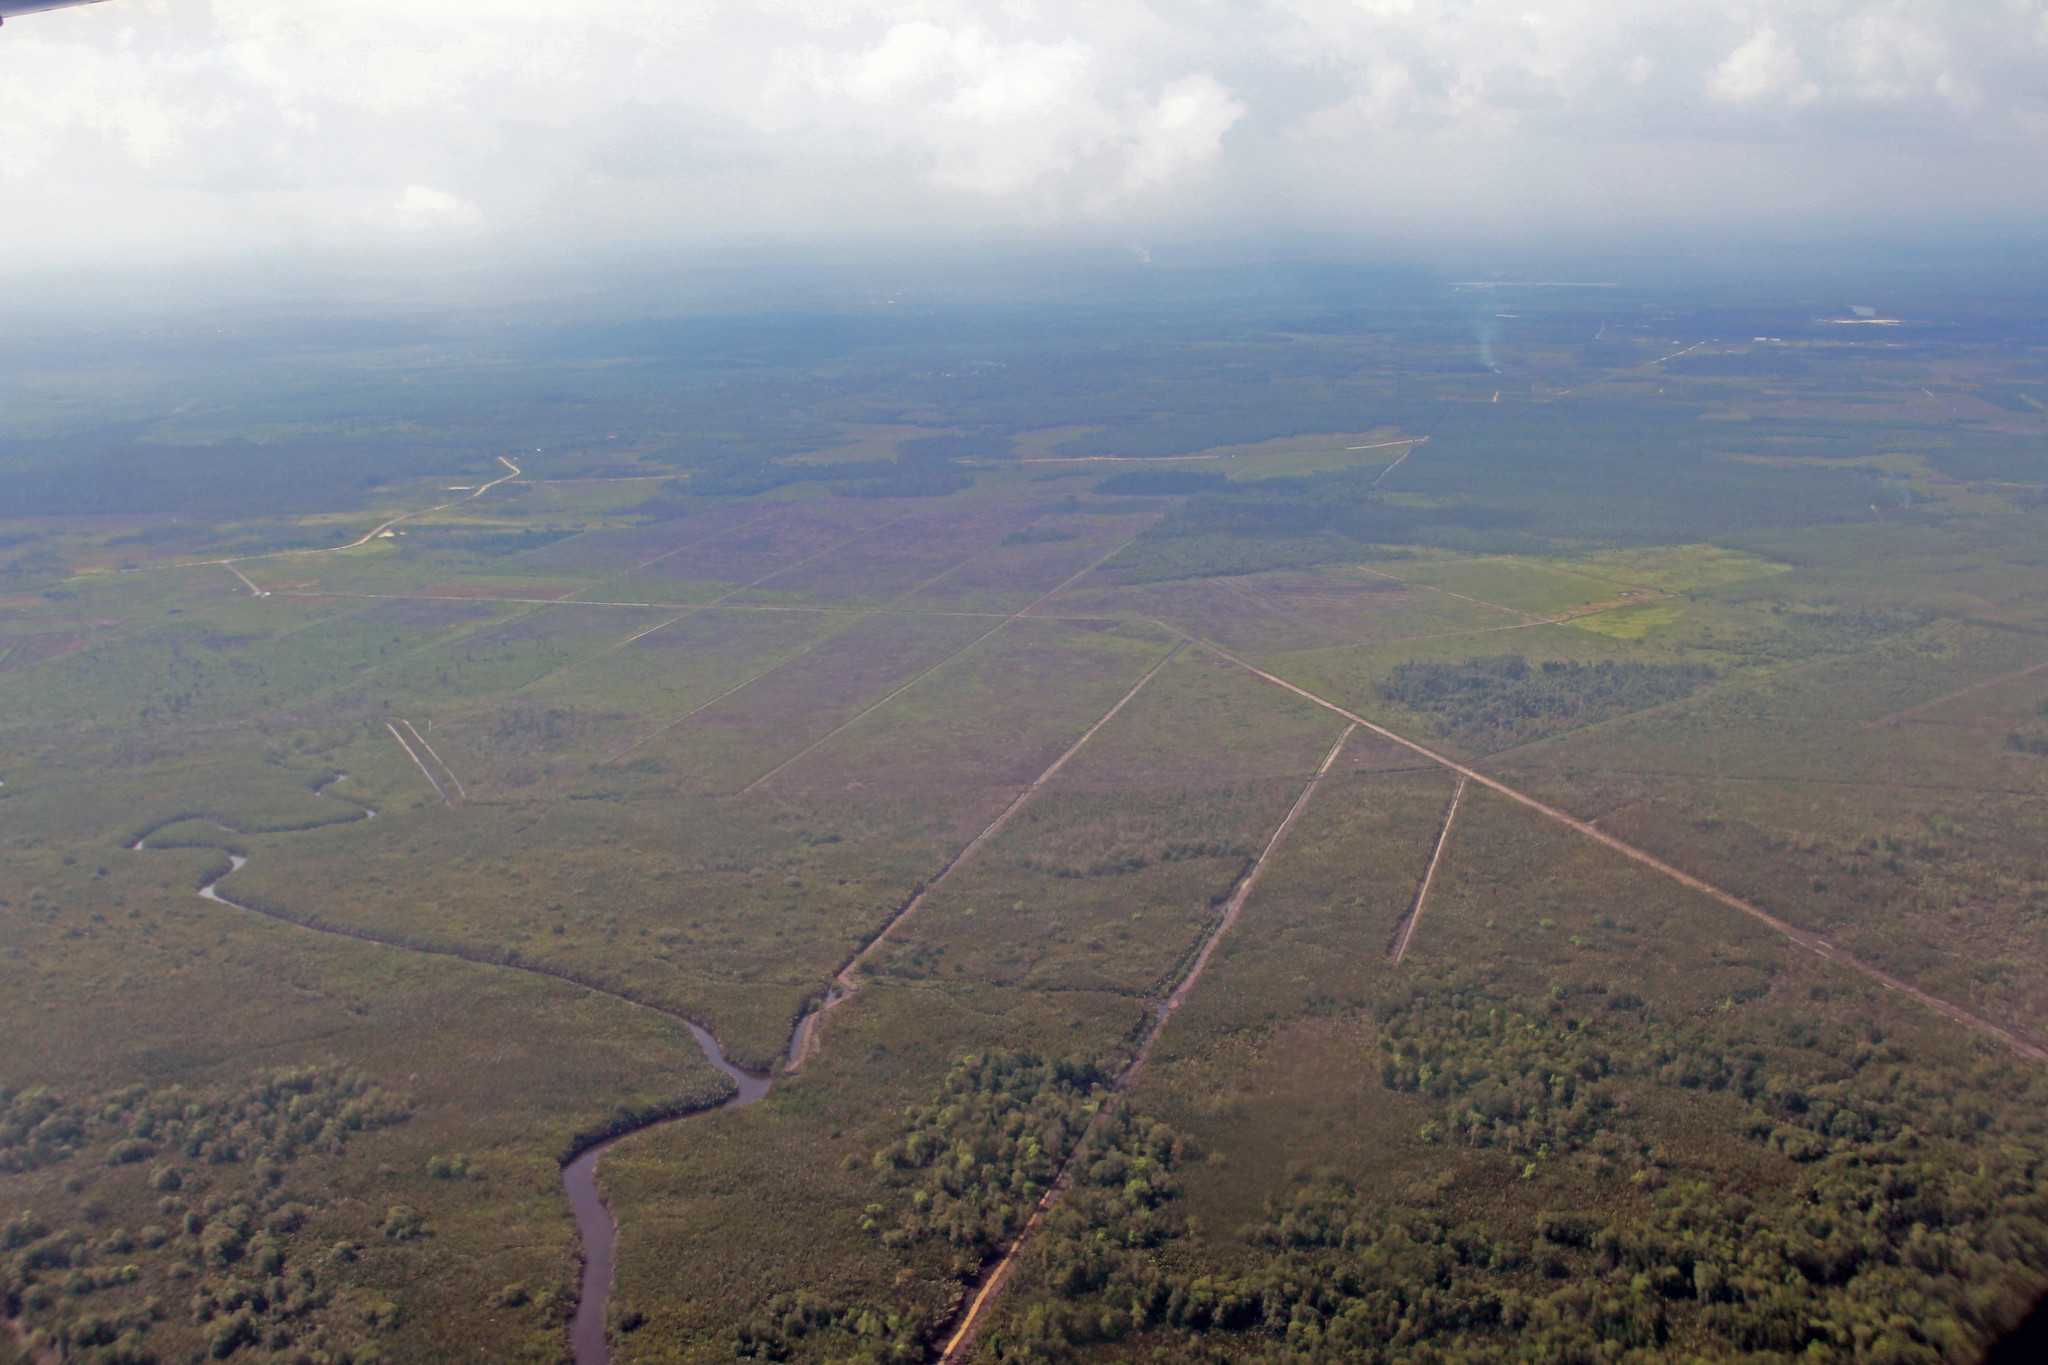 Drainage canals in peatland in Central Kalimantan.